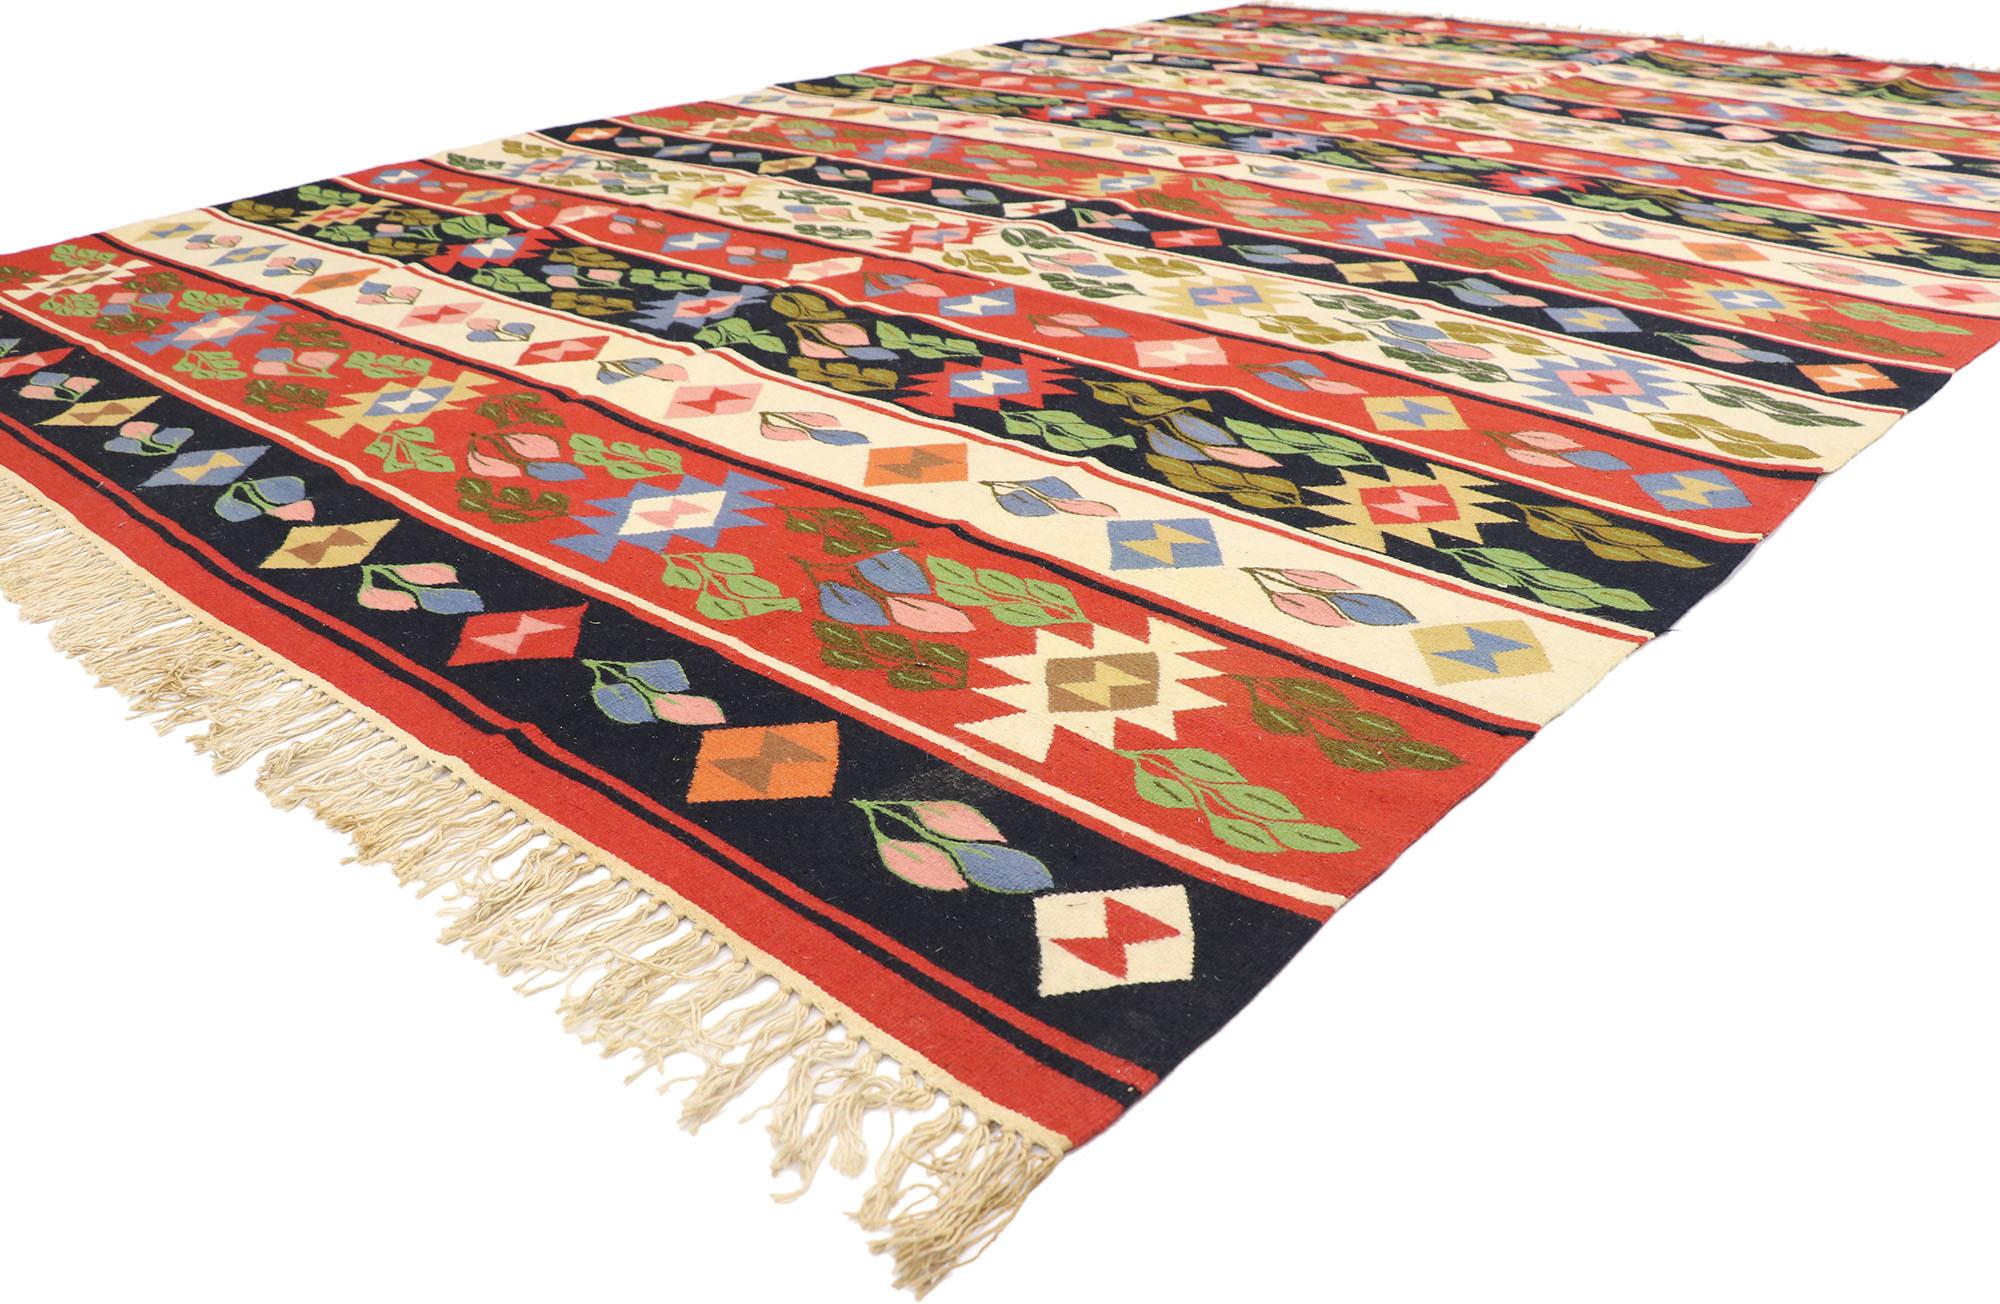 78013 Vintage Romanian Kilim Rug, 08'02 x 12'01. Embark on a captivating journey where the bohemian jungalow aesthetic converges with tribal enchantment in this handwoven wool vintage Romanian kilim rug. The eye-catching botanical design and lively